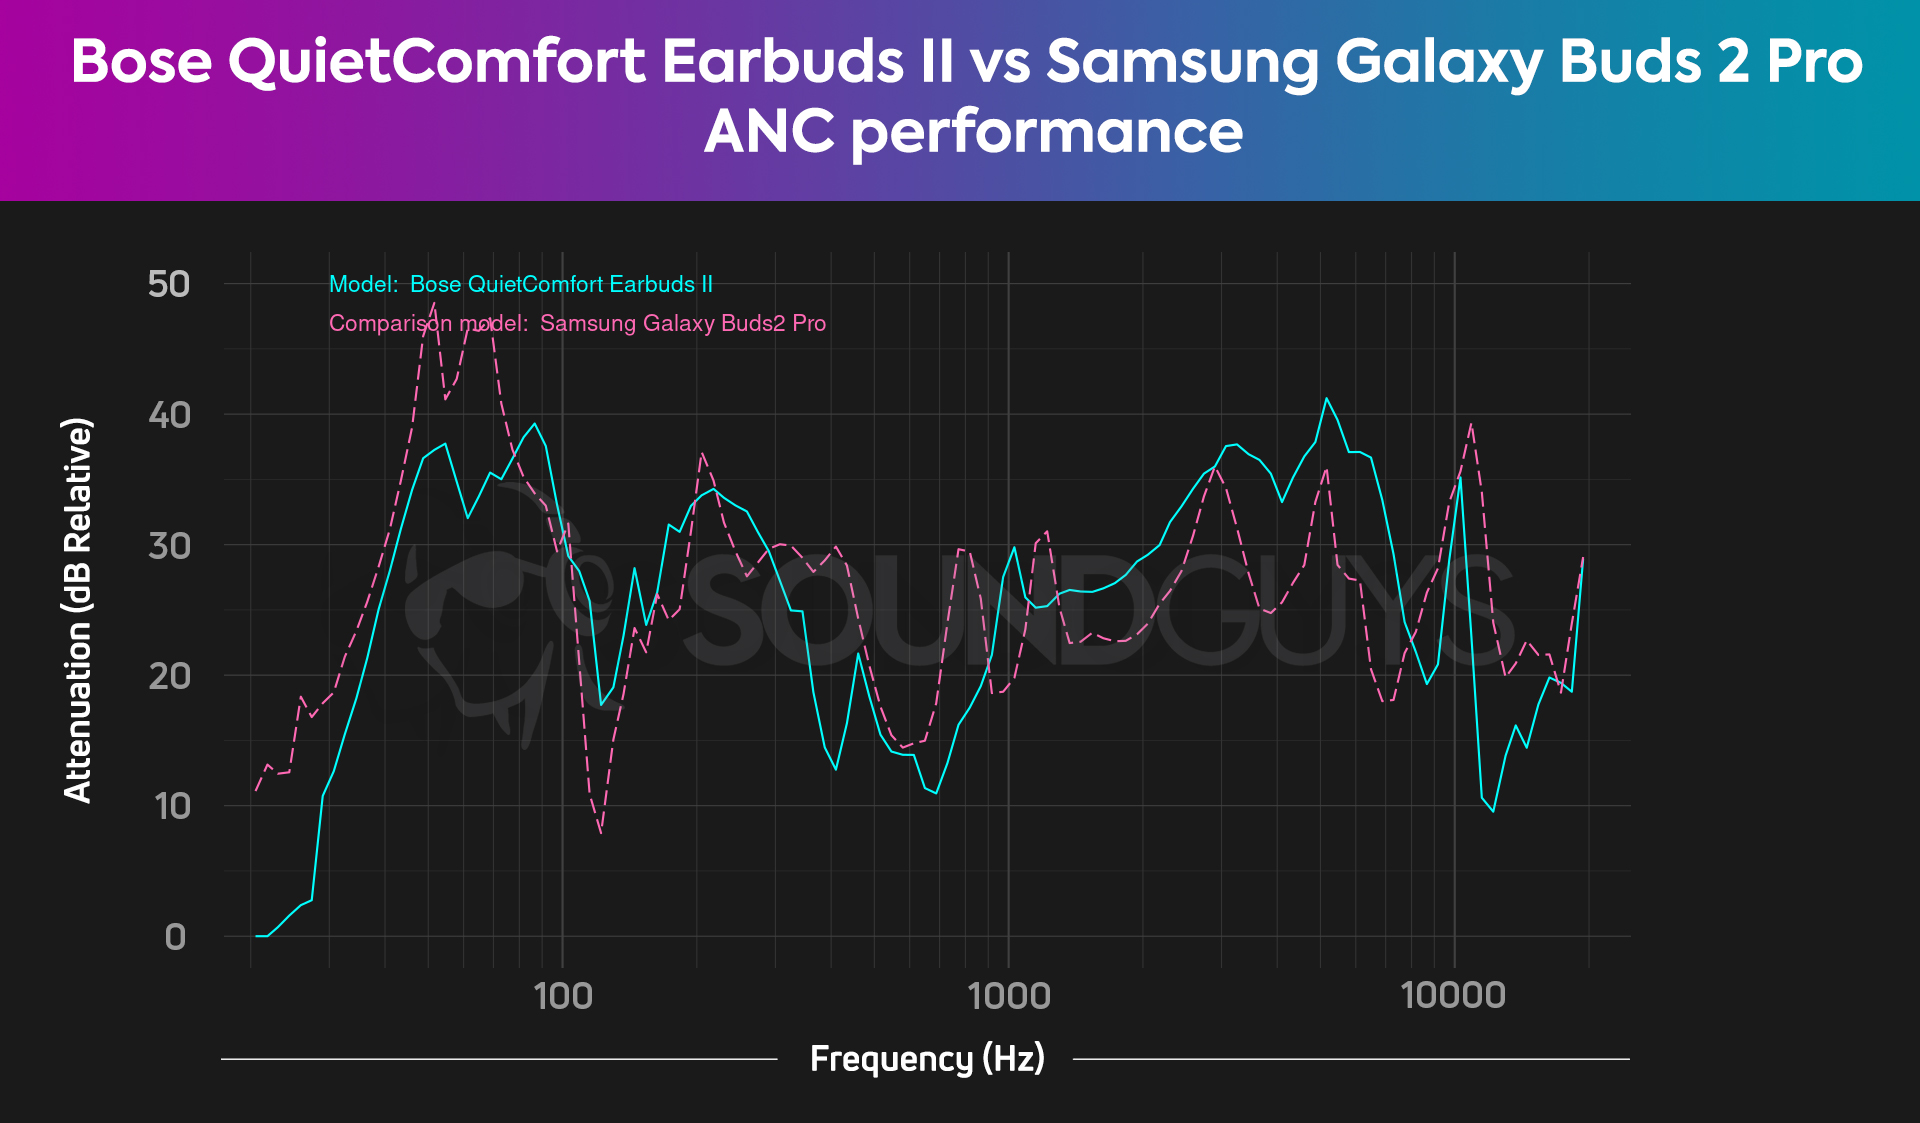 Chart depicts the combined isolation and ANC performances of the Bose QuietComfort Earbuds II versus the Samsung Galaxy Buds 2 Pro.